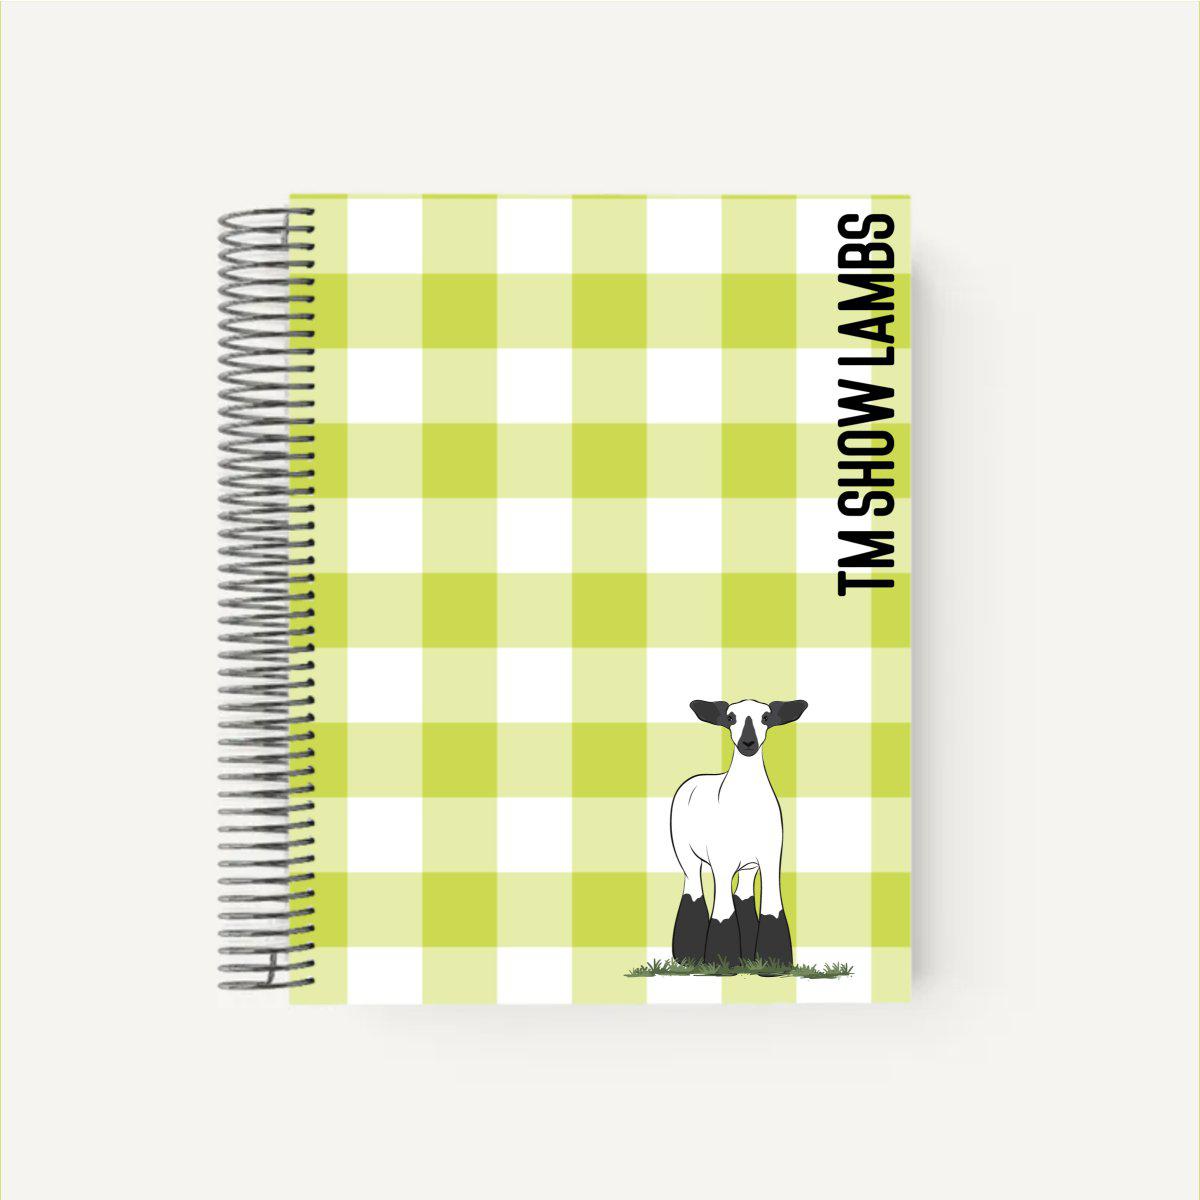 Personalized-Livestock-Lambing Record Planner - Gingham Cover